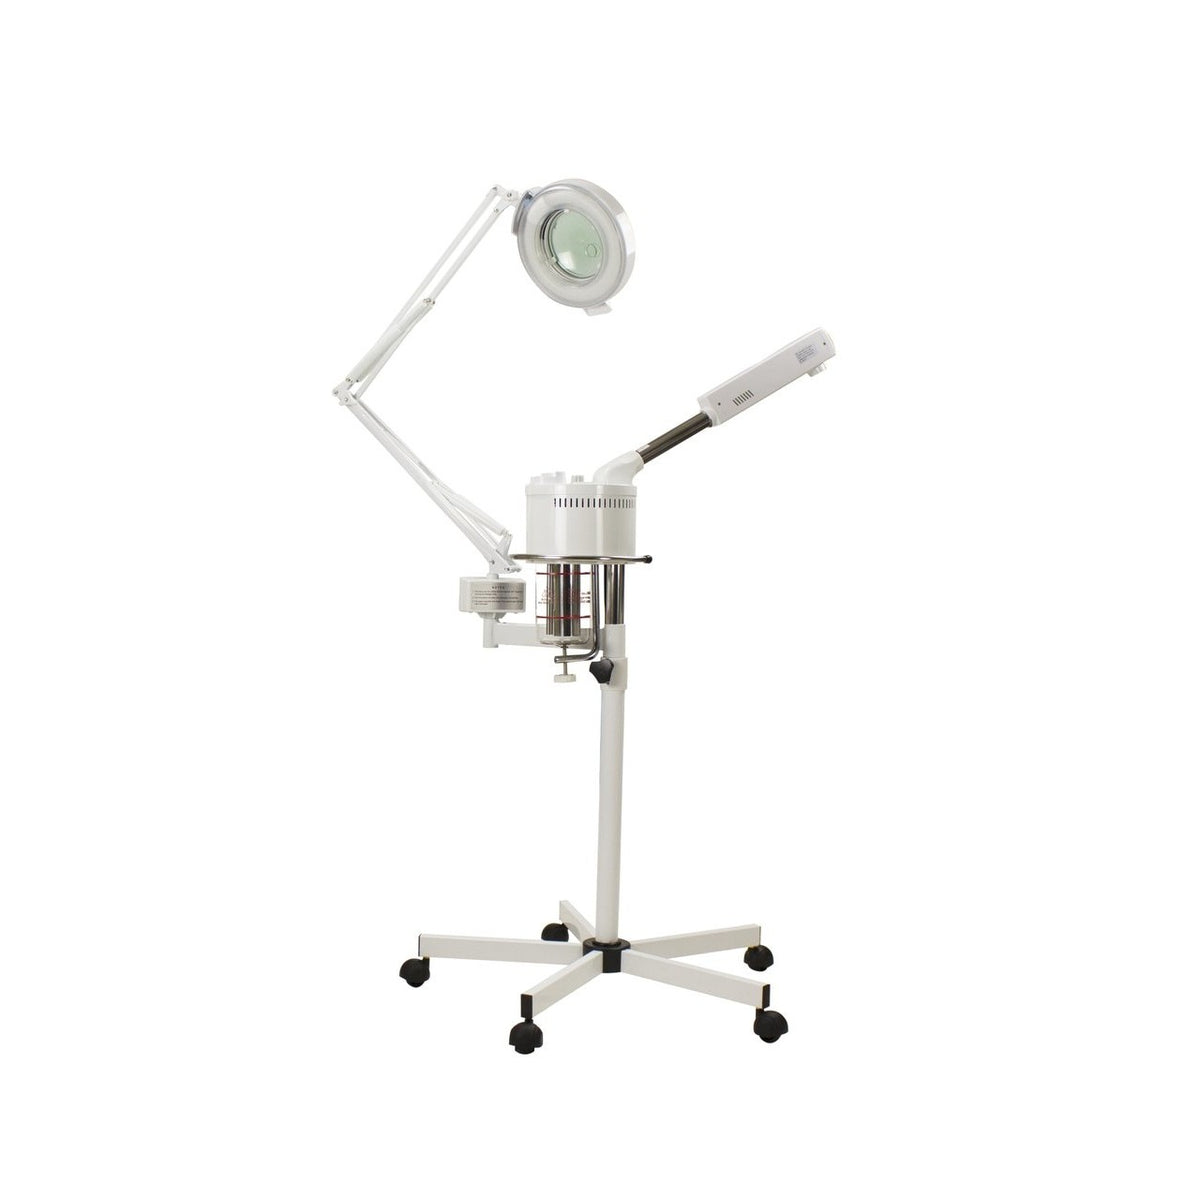 Dermalogic Dermalogic Aries Facial Steamer with Magnifying Lamp Facial Machine - ChairsThatGive